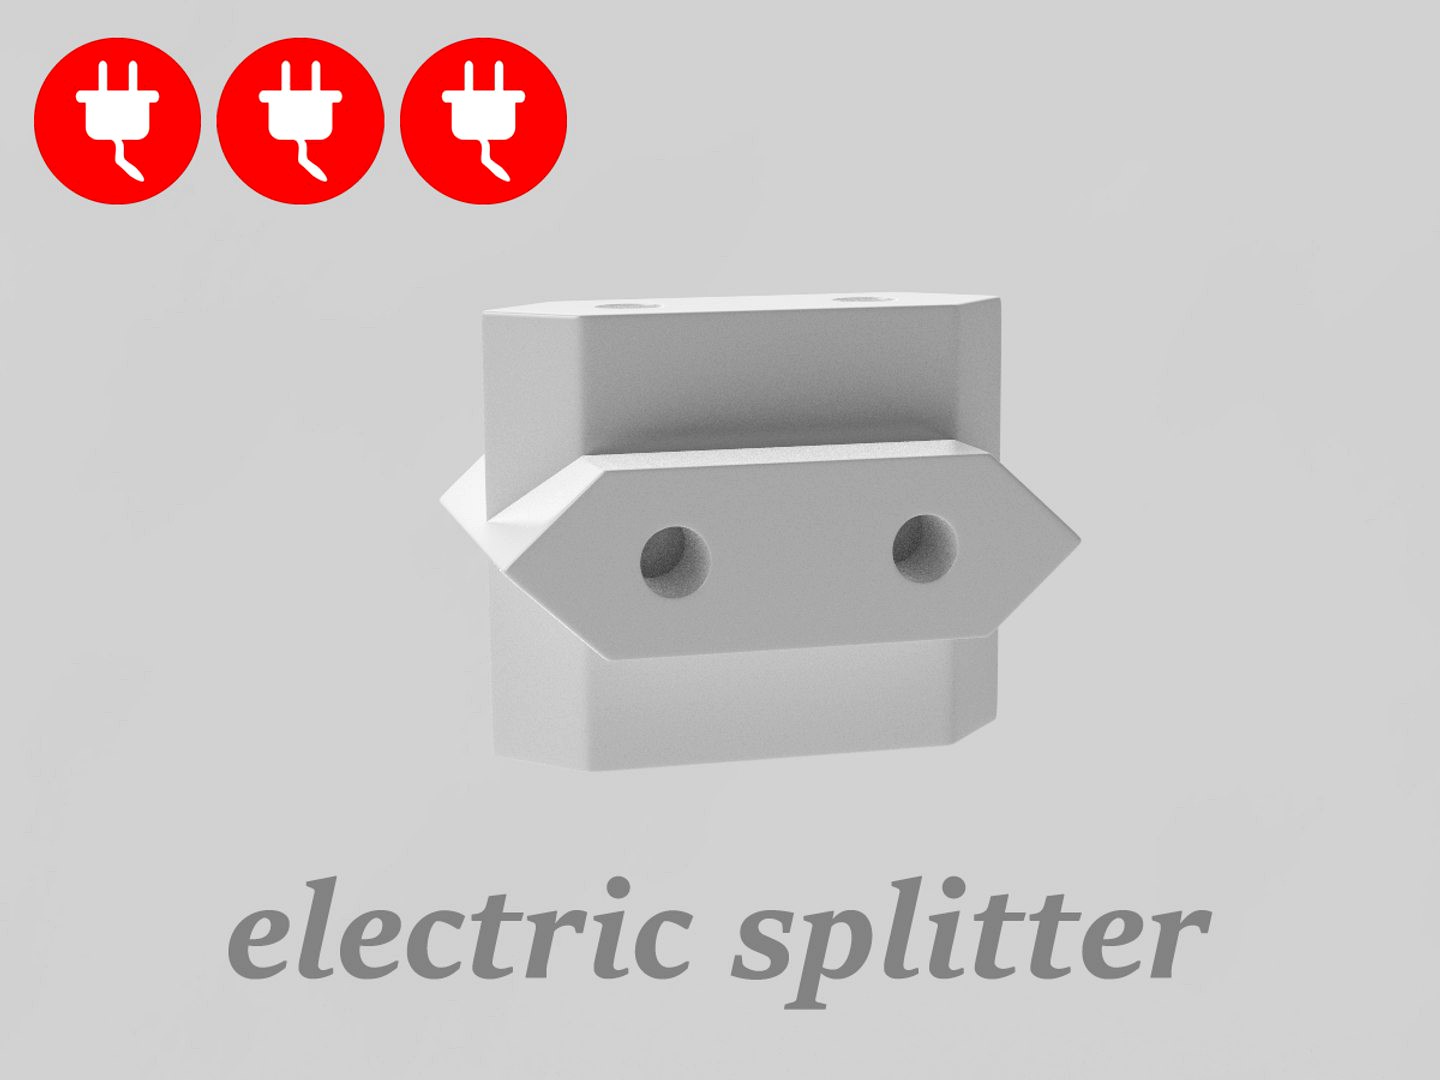 Electrical Outlet electric splitter